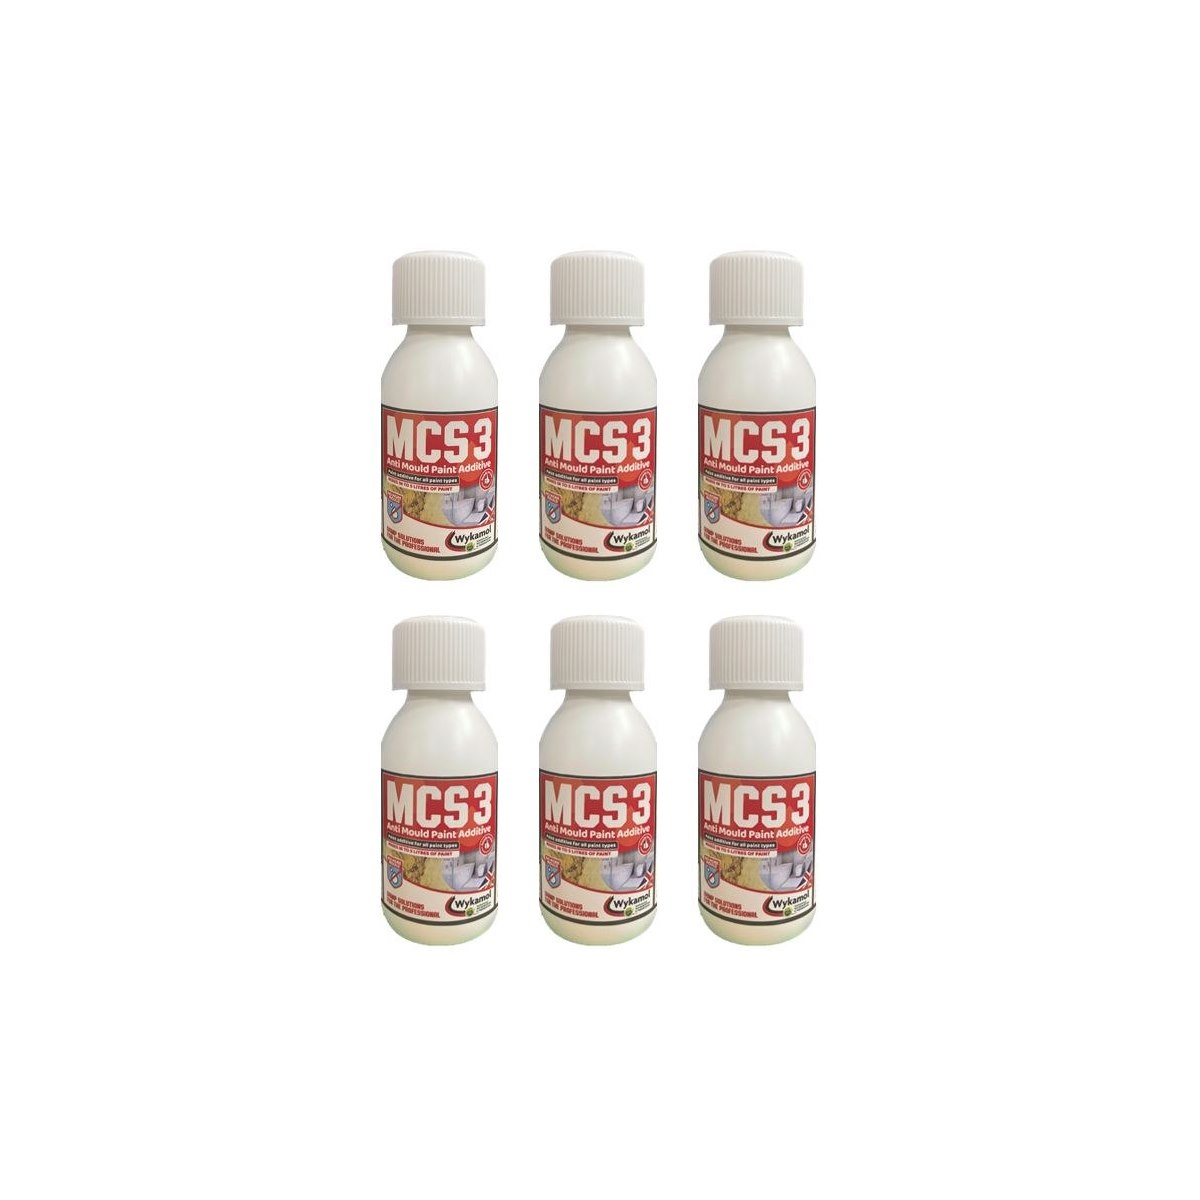 Case of 6 x Wykamol MCS3 No More Mould Anti Mould Paint Additive 100ml